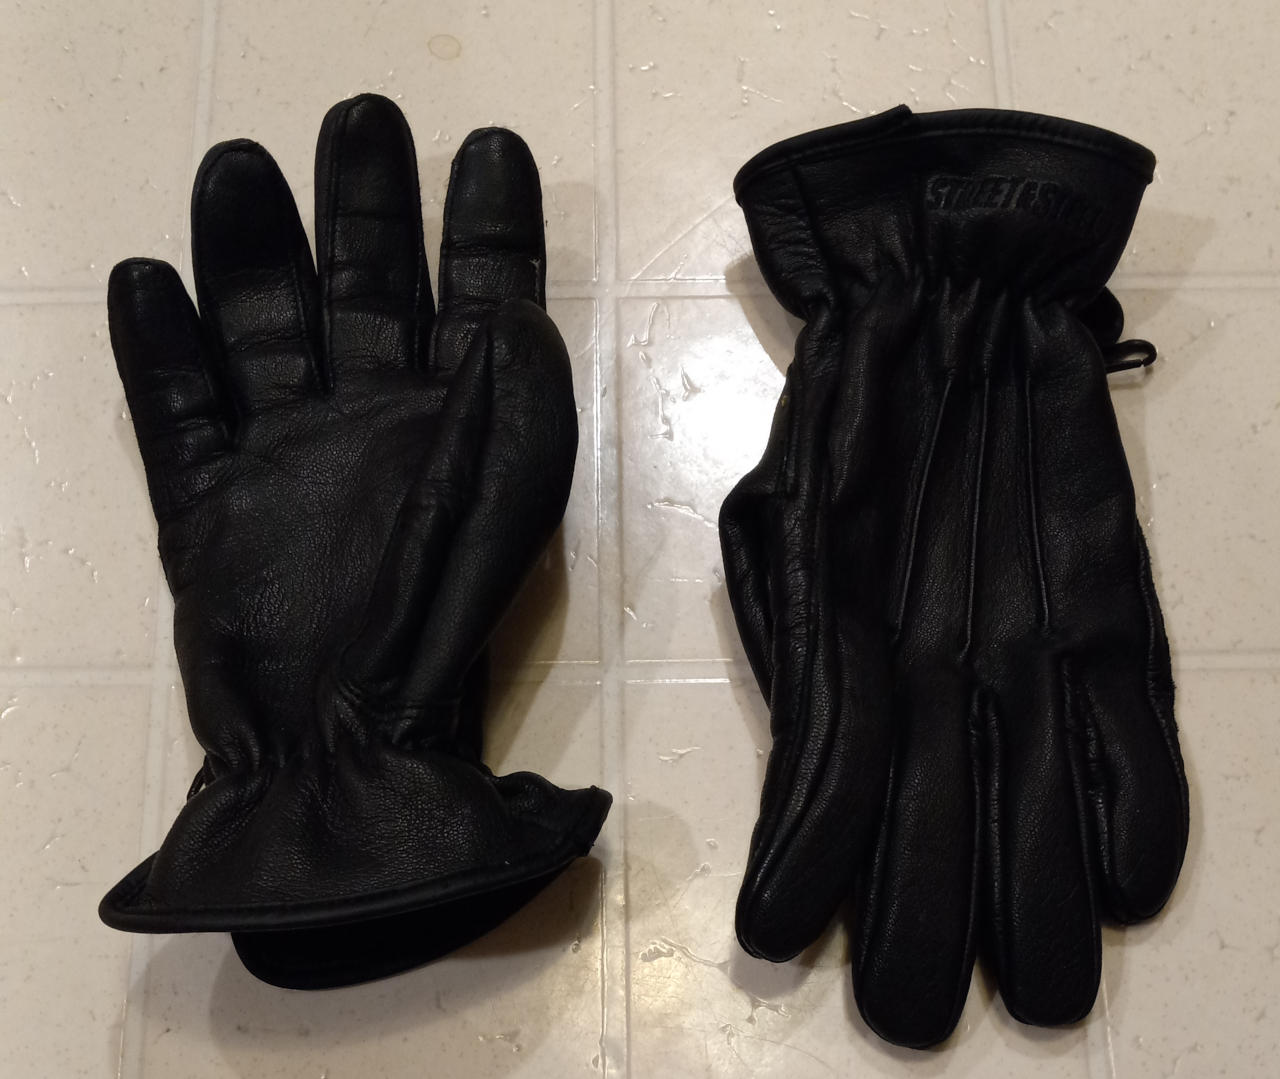 My First Motorcycle gloves, Street & Steel leather gloves.